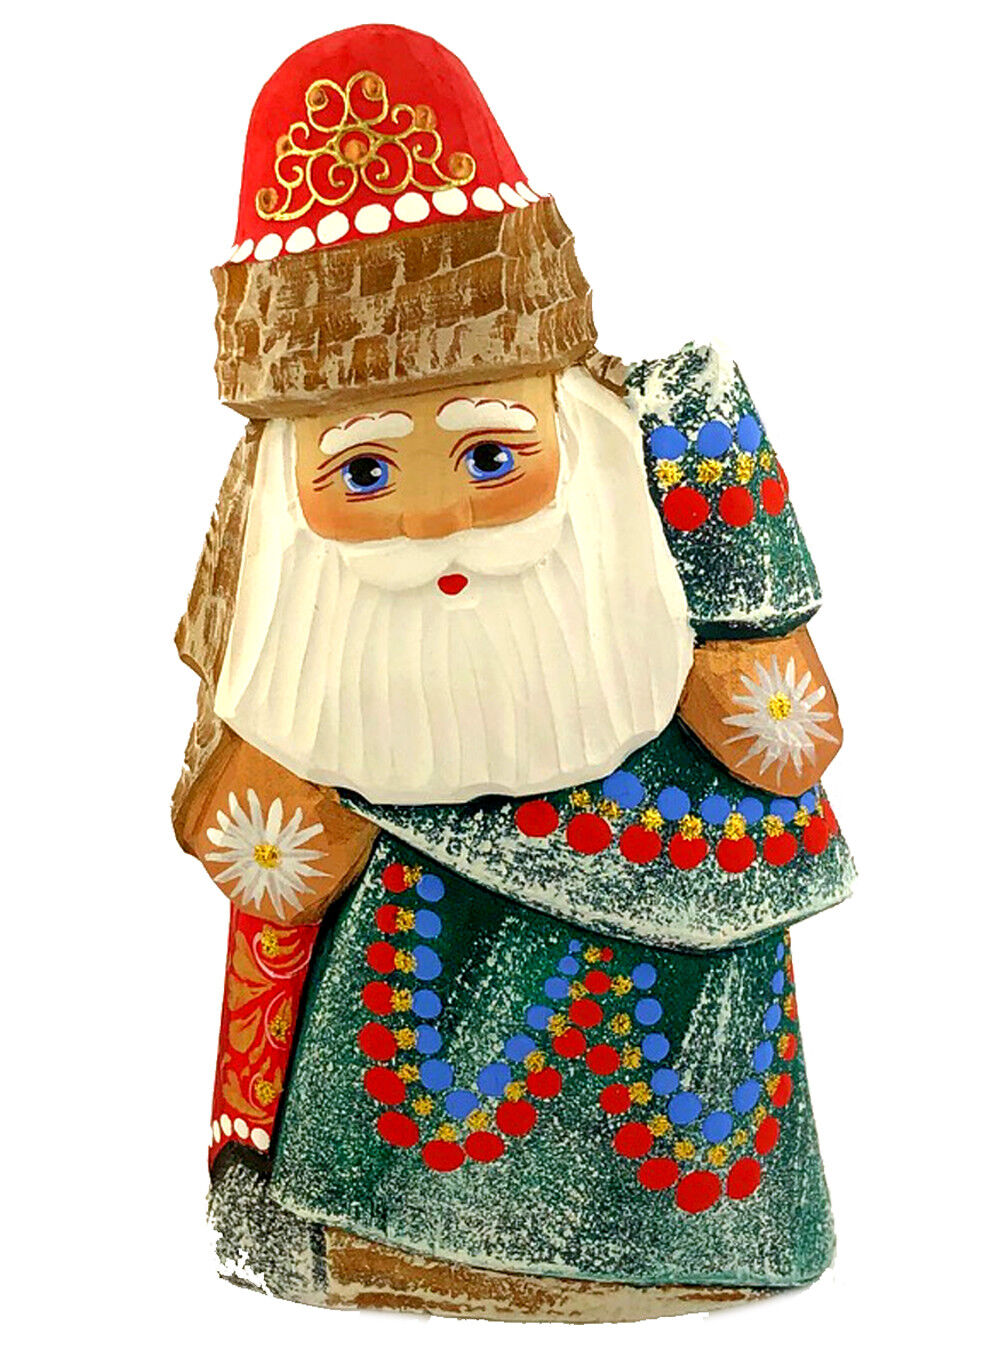 AUTHENTIC Russian Hand Painted Santa Claus Figurine Father Frost Holding Tree